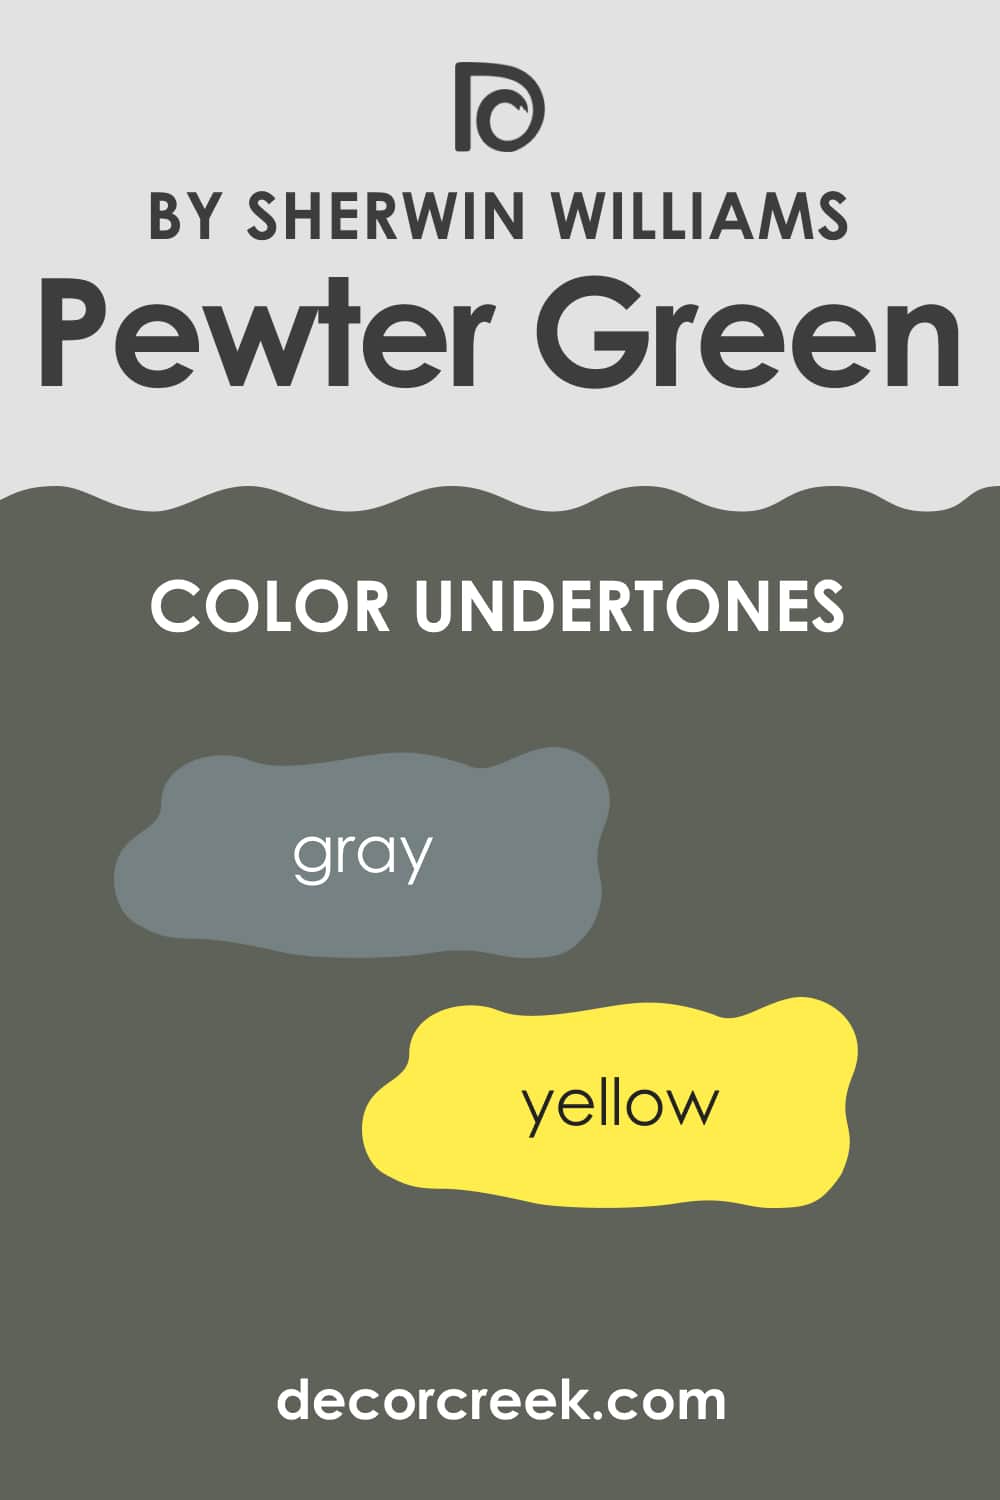 What Undertones Does Pewter Green SW-6208 Have?